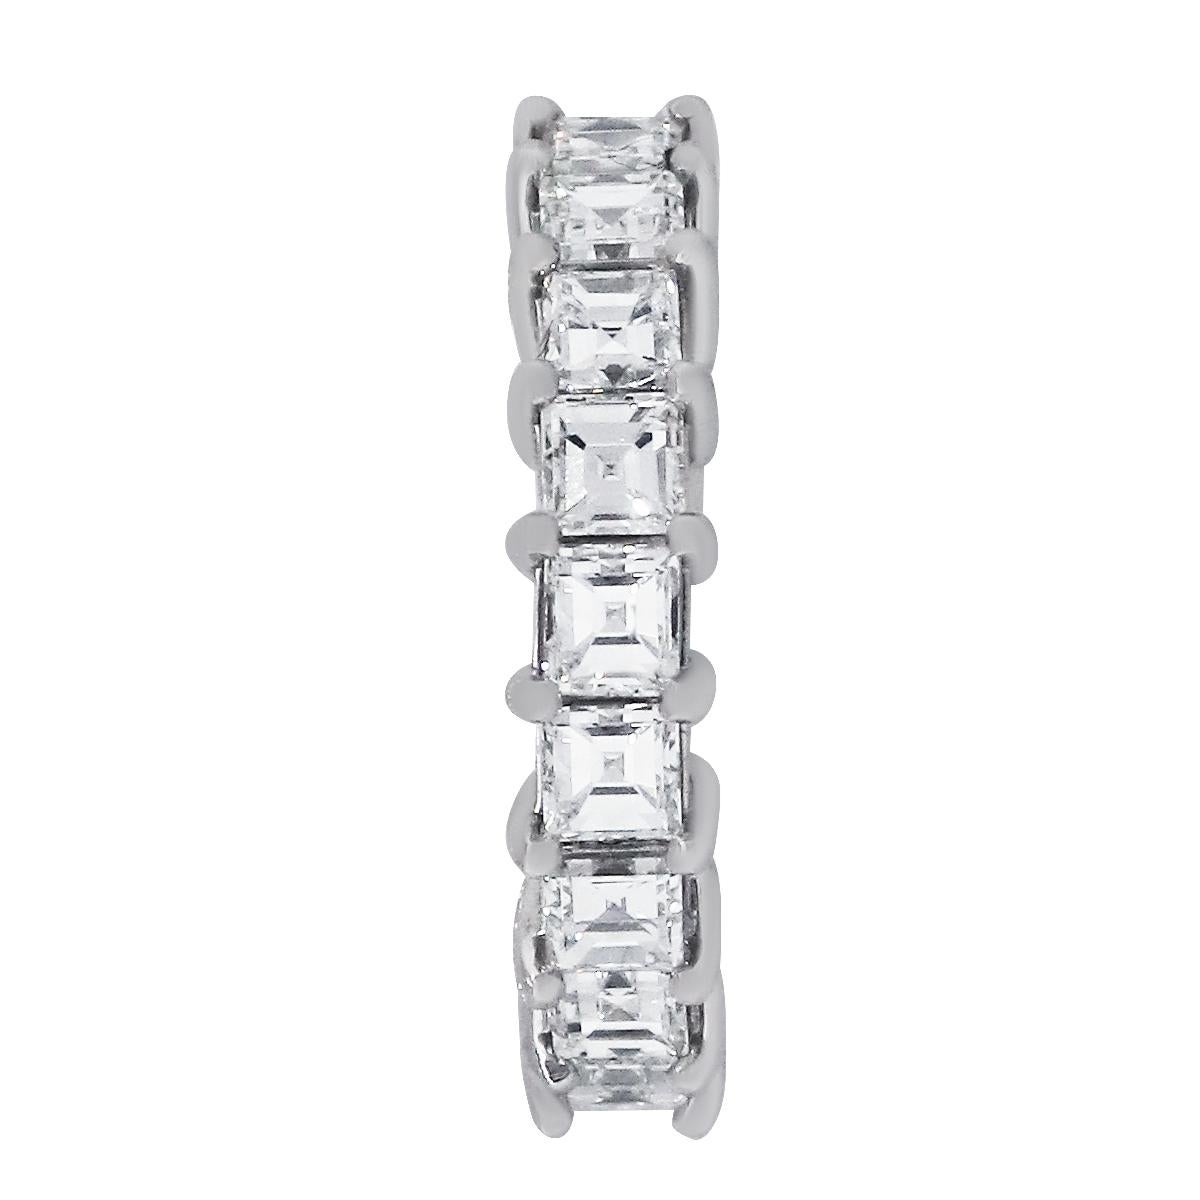 Material: Platinum
Diamond Details: Approximately 4.30ctw princess cut diamonds. Diamonds are IGI-F-G in color and VS2-SI1 in clarity.
Ring Size: 7
Item Weight: 7.4g (4.8dwt)
Measurements: 1″ x 0.19″ x 1″
SKU: A30312805